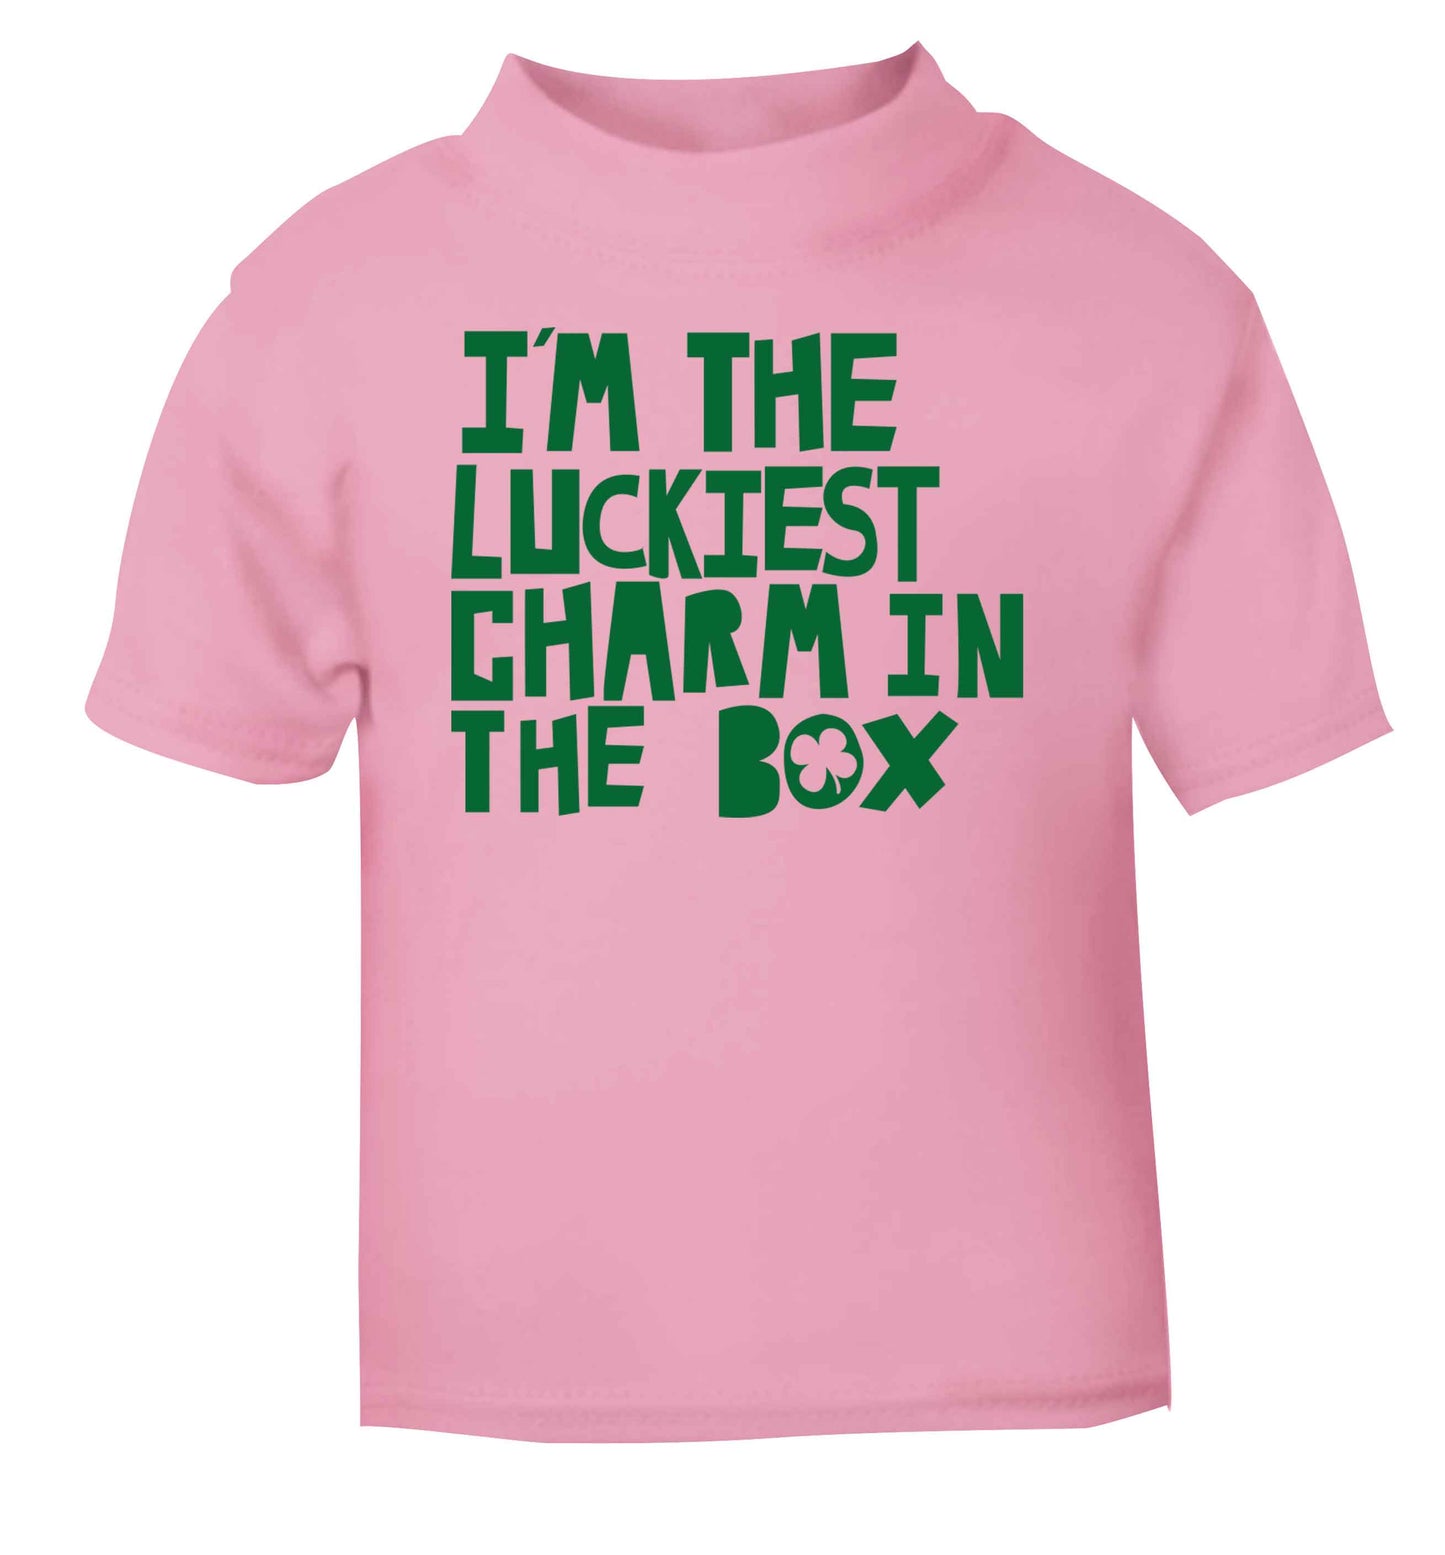 I'm the luckiest charm in the box light pink baby toddler Tshirt 2 Years